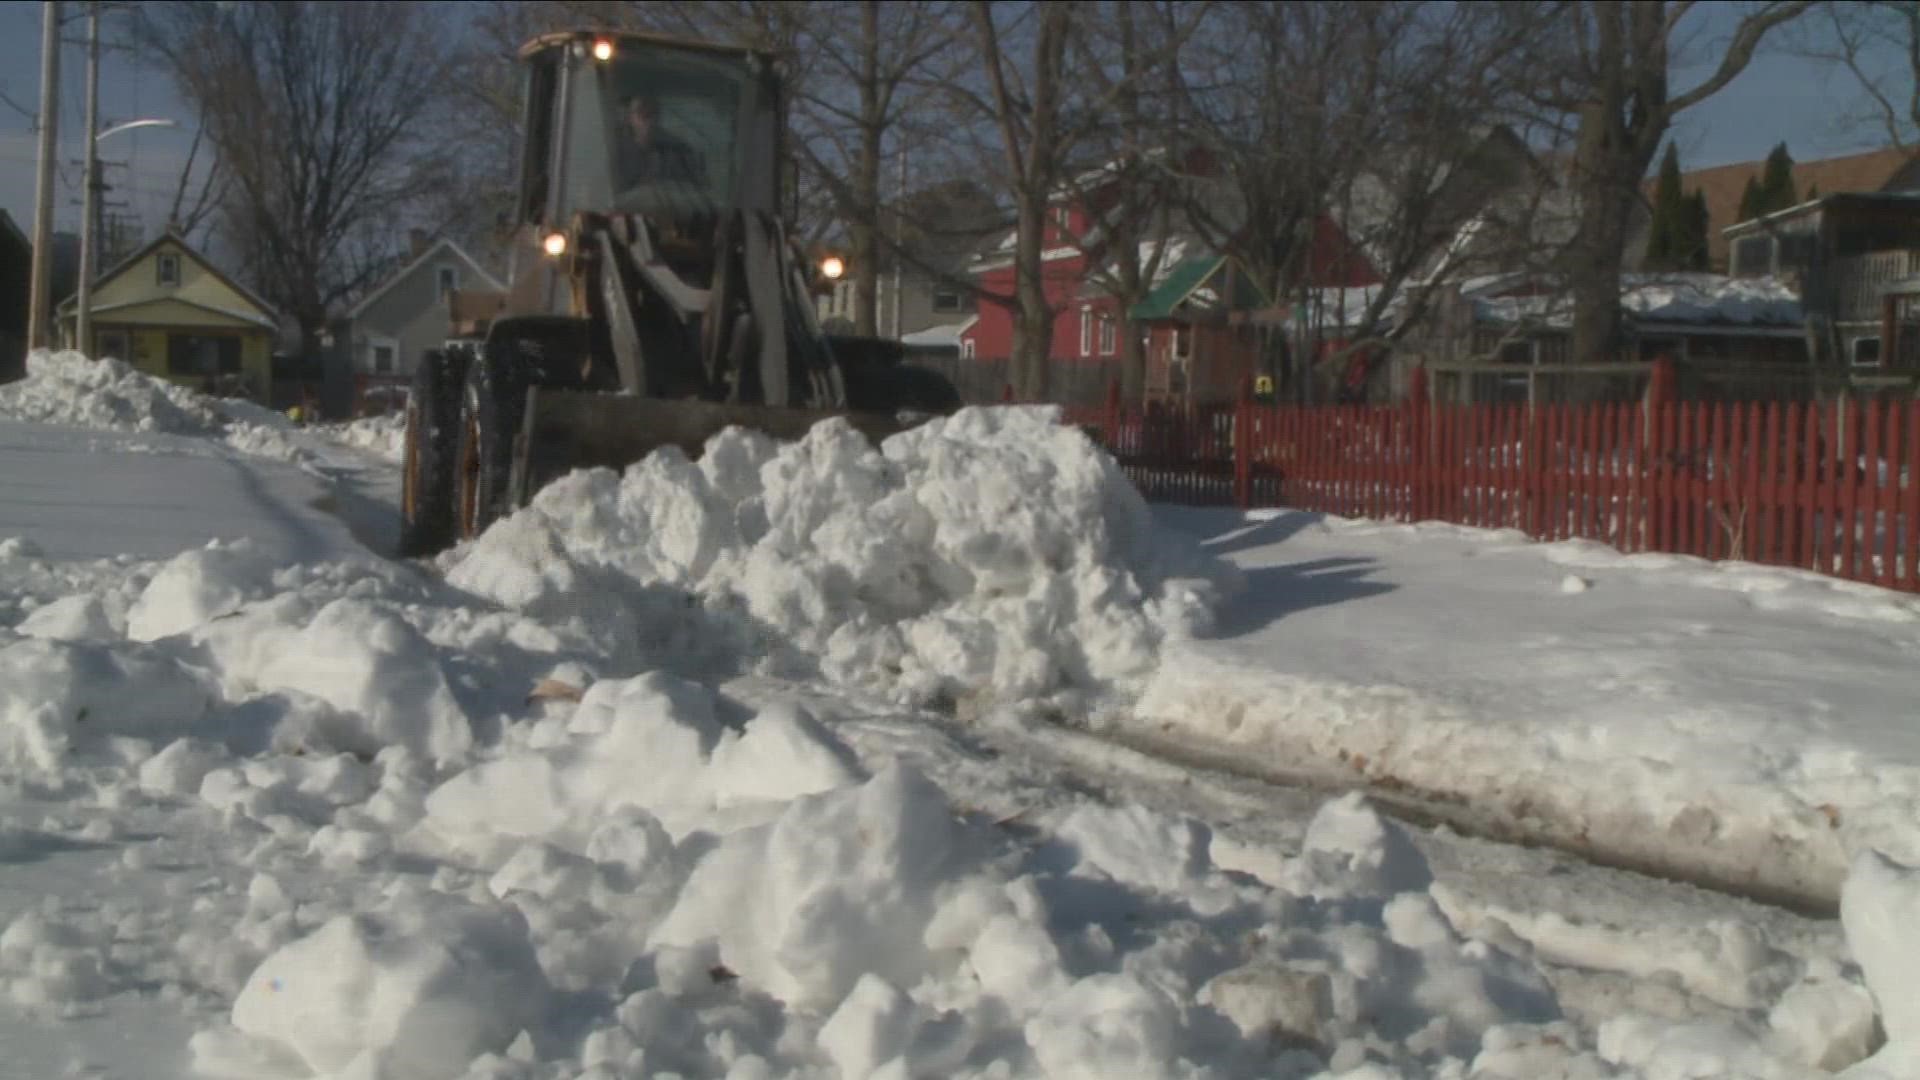 Right now, in South Buffalo, Lovejoy, and Kaisertown the focus is on snow removal, not plowing.